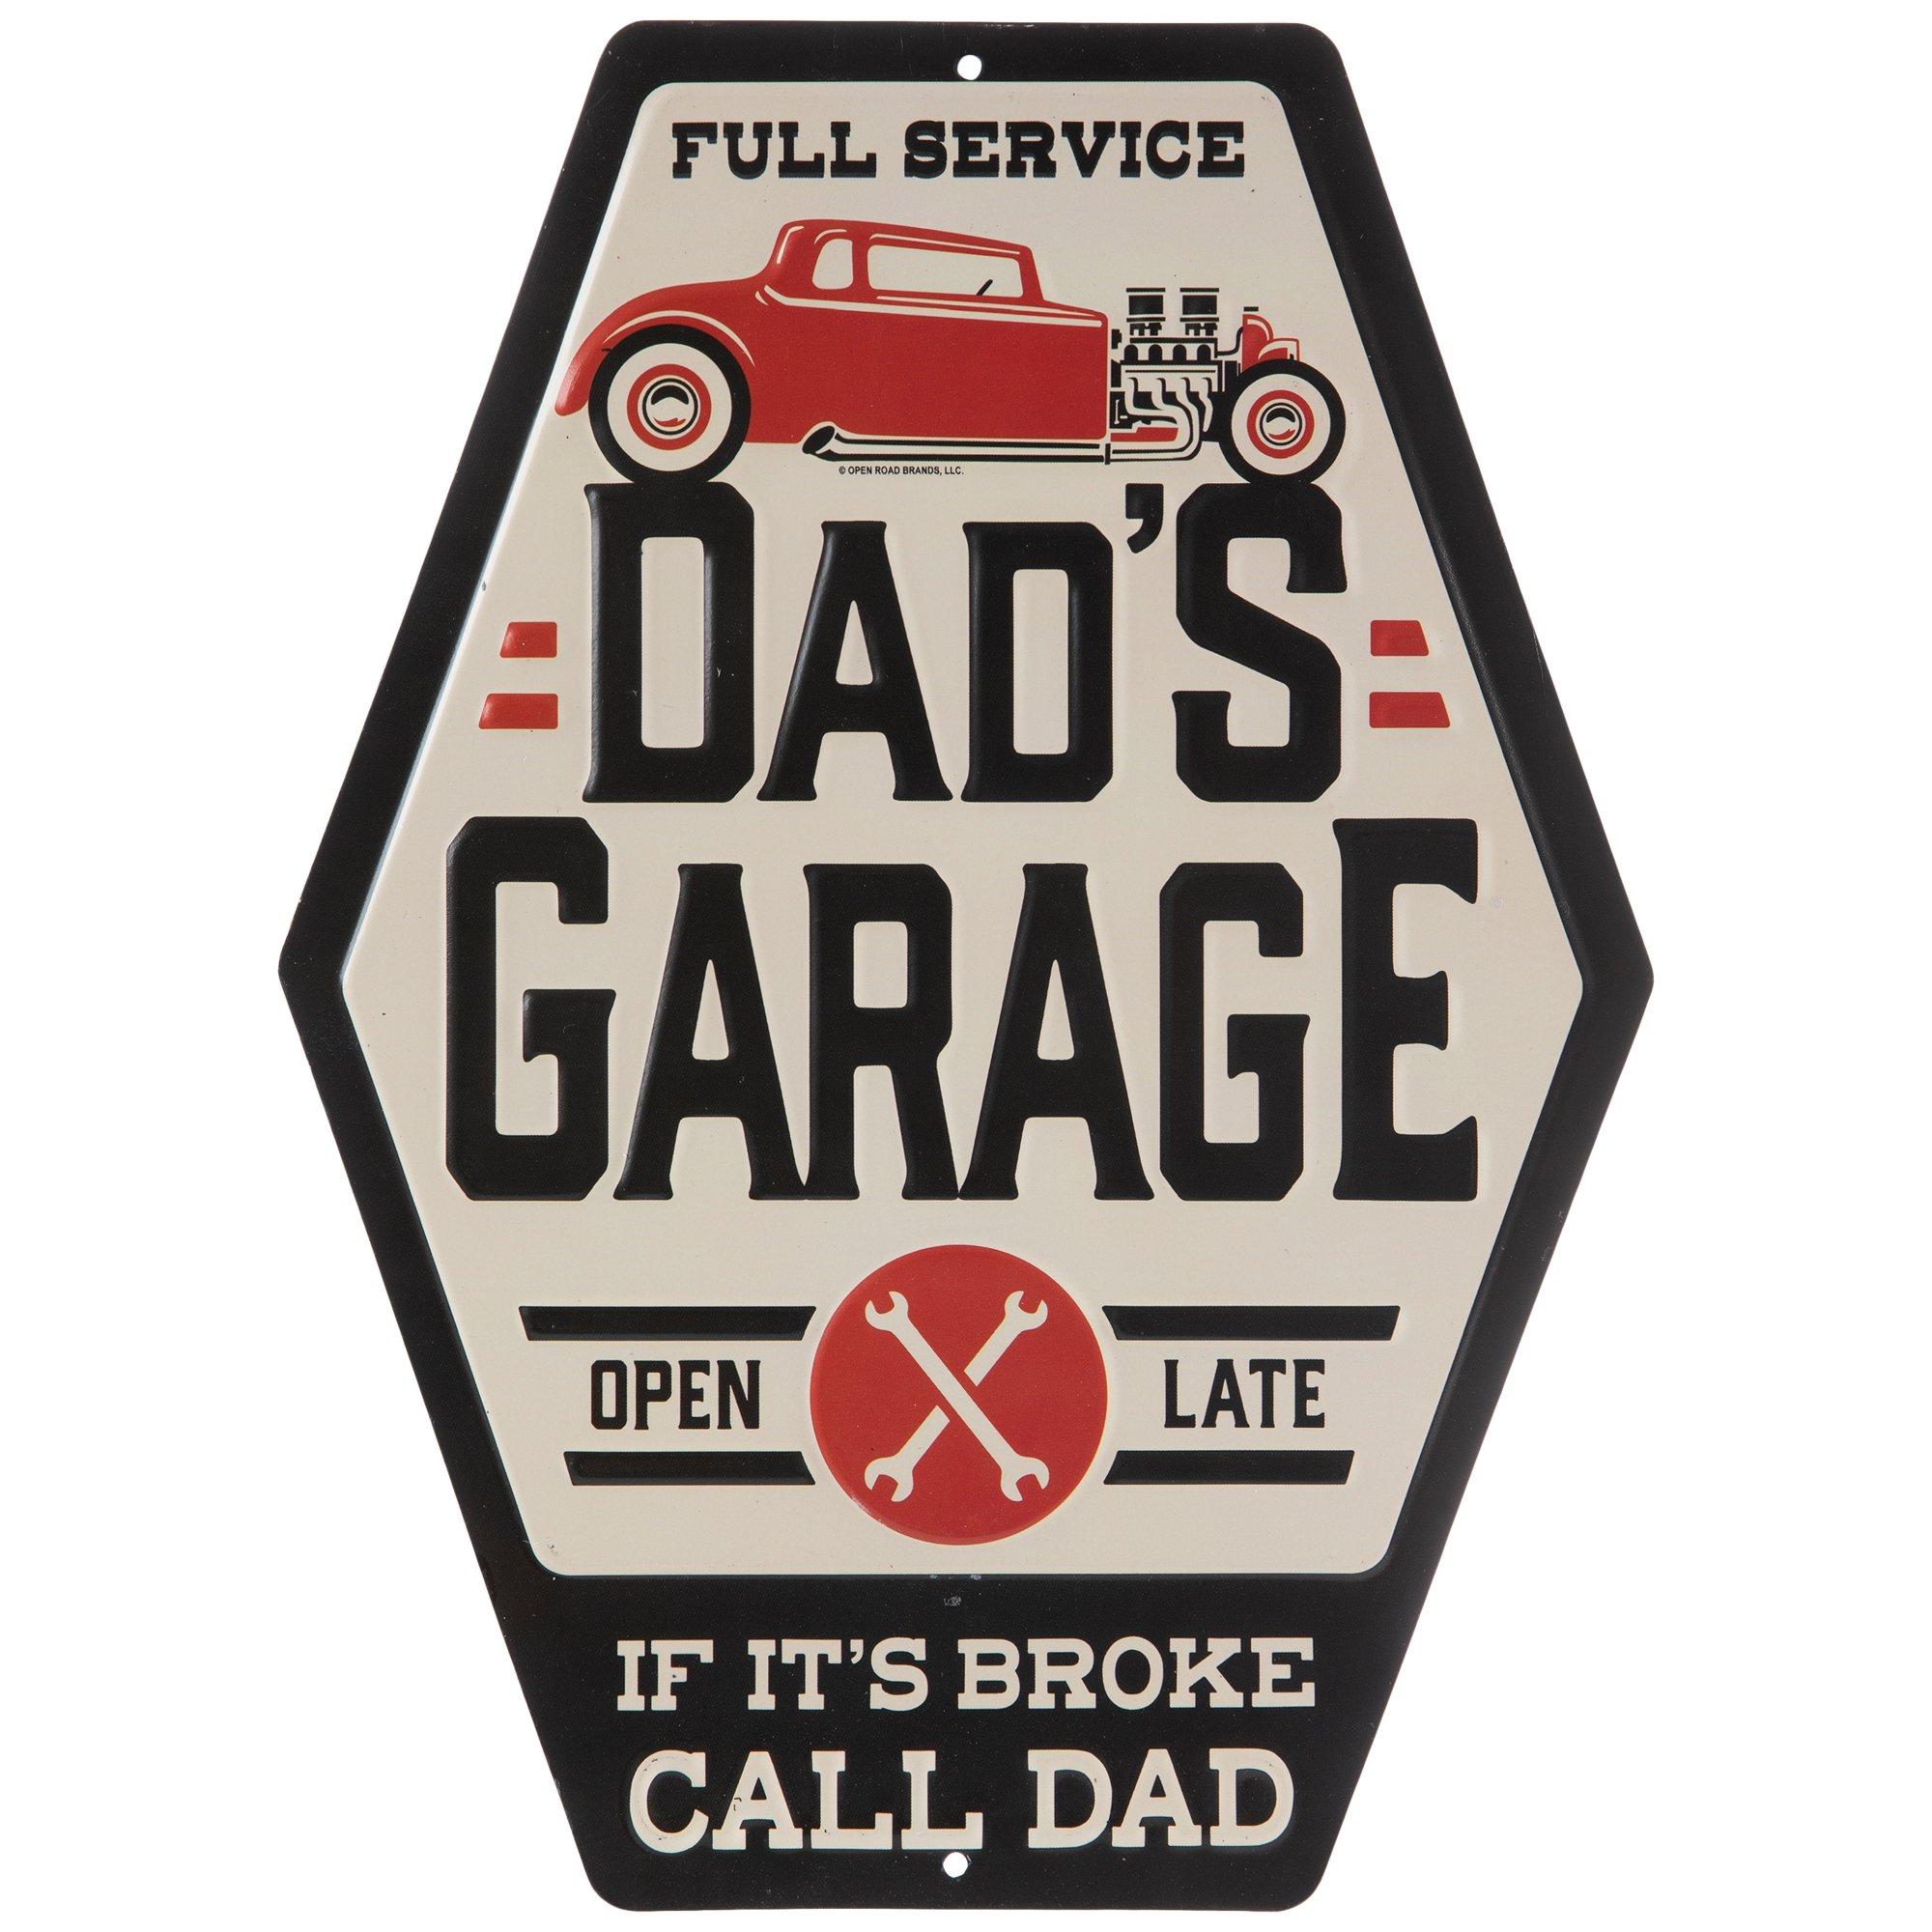 Garage Selling: OLX and Tackthis, designdrive.co/lab/though…